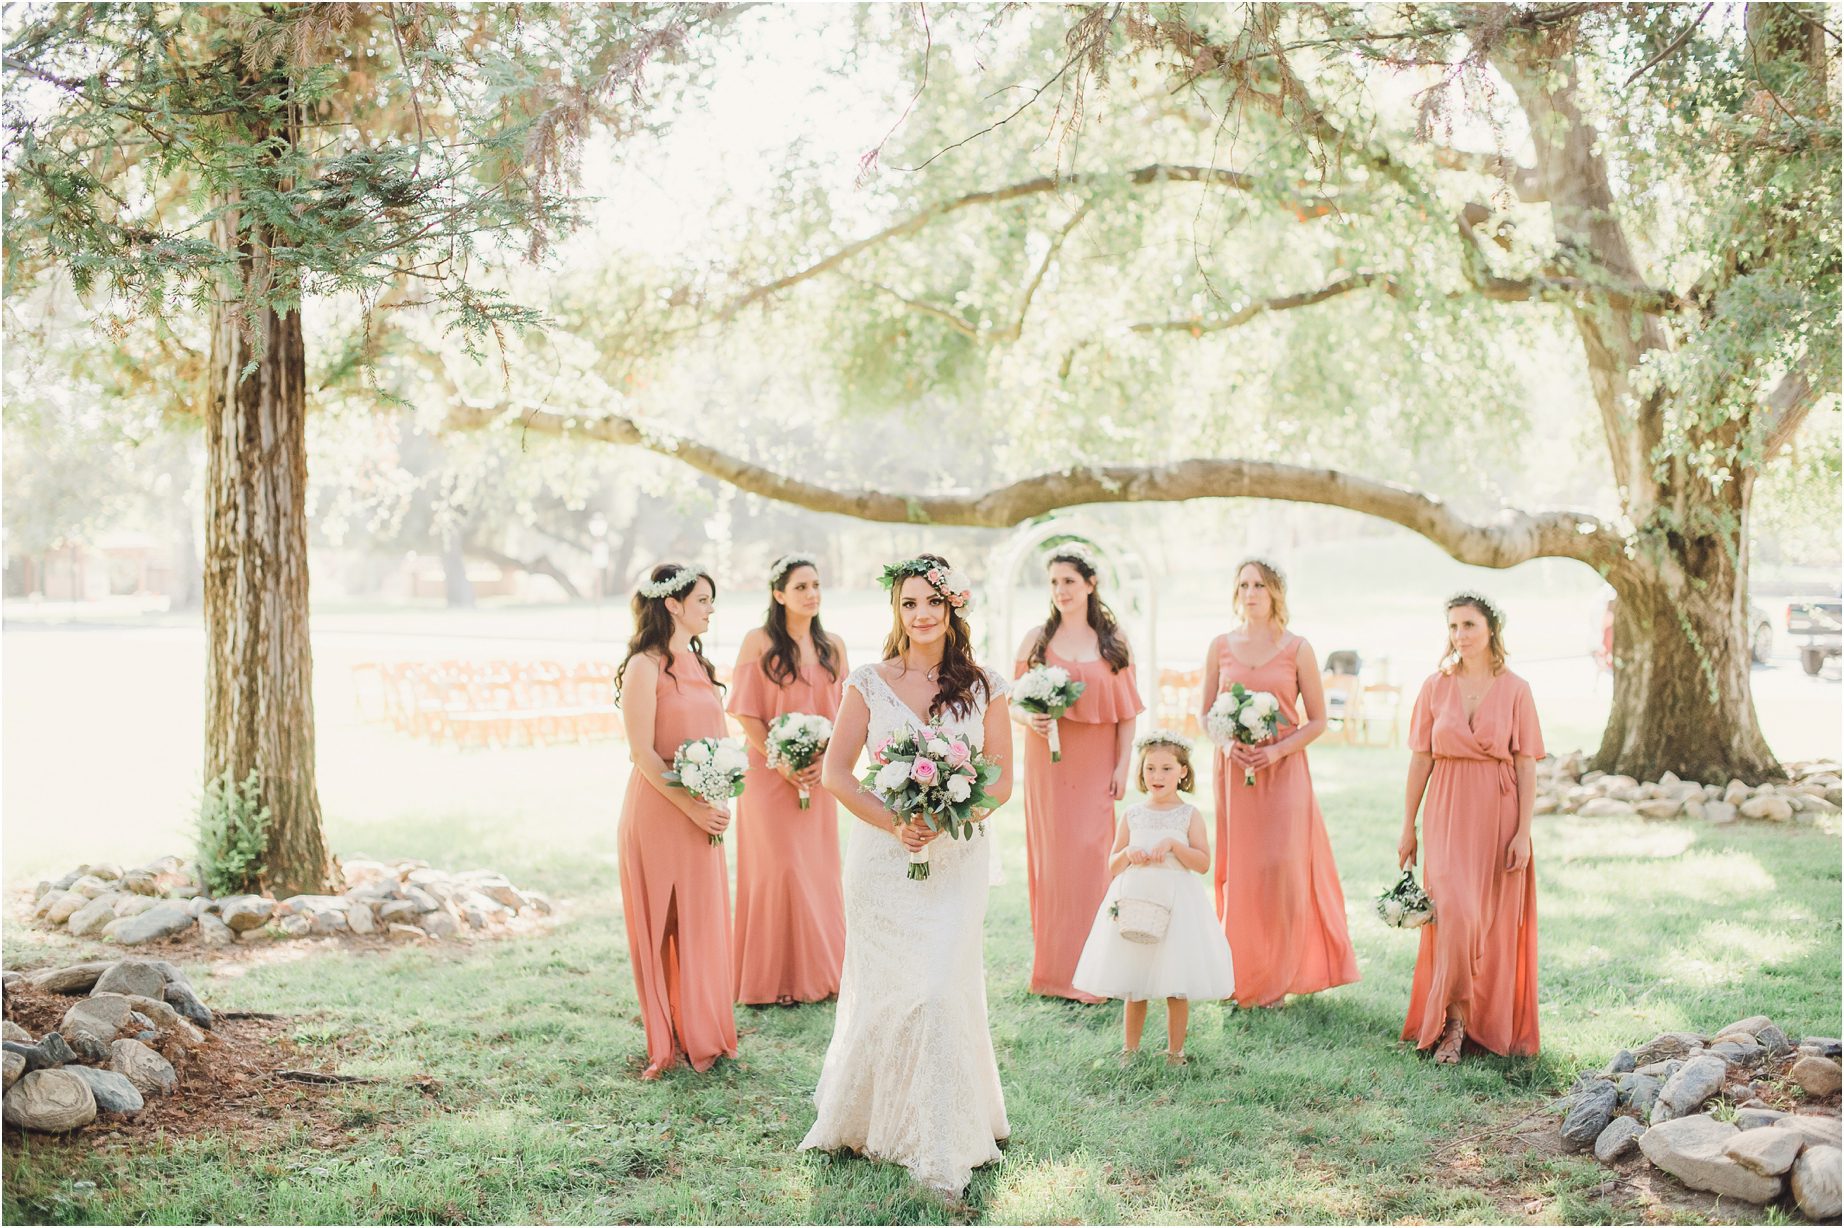 Middle ranch Wedding 0035